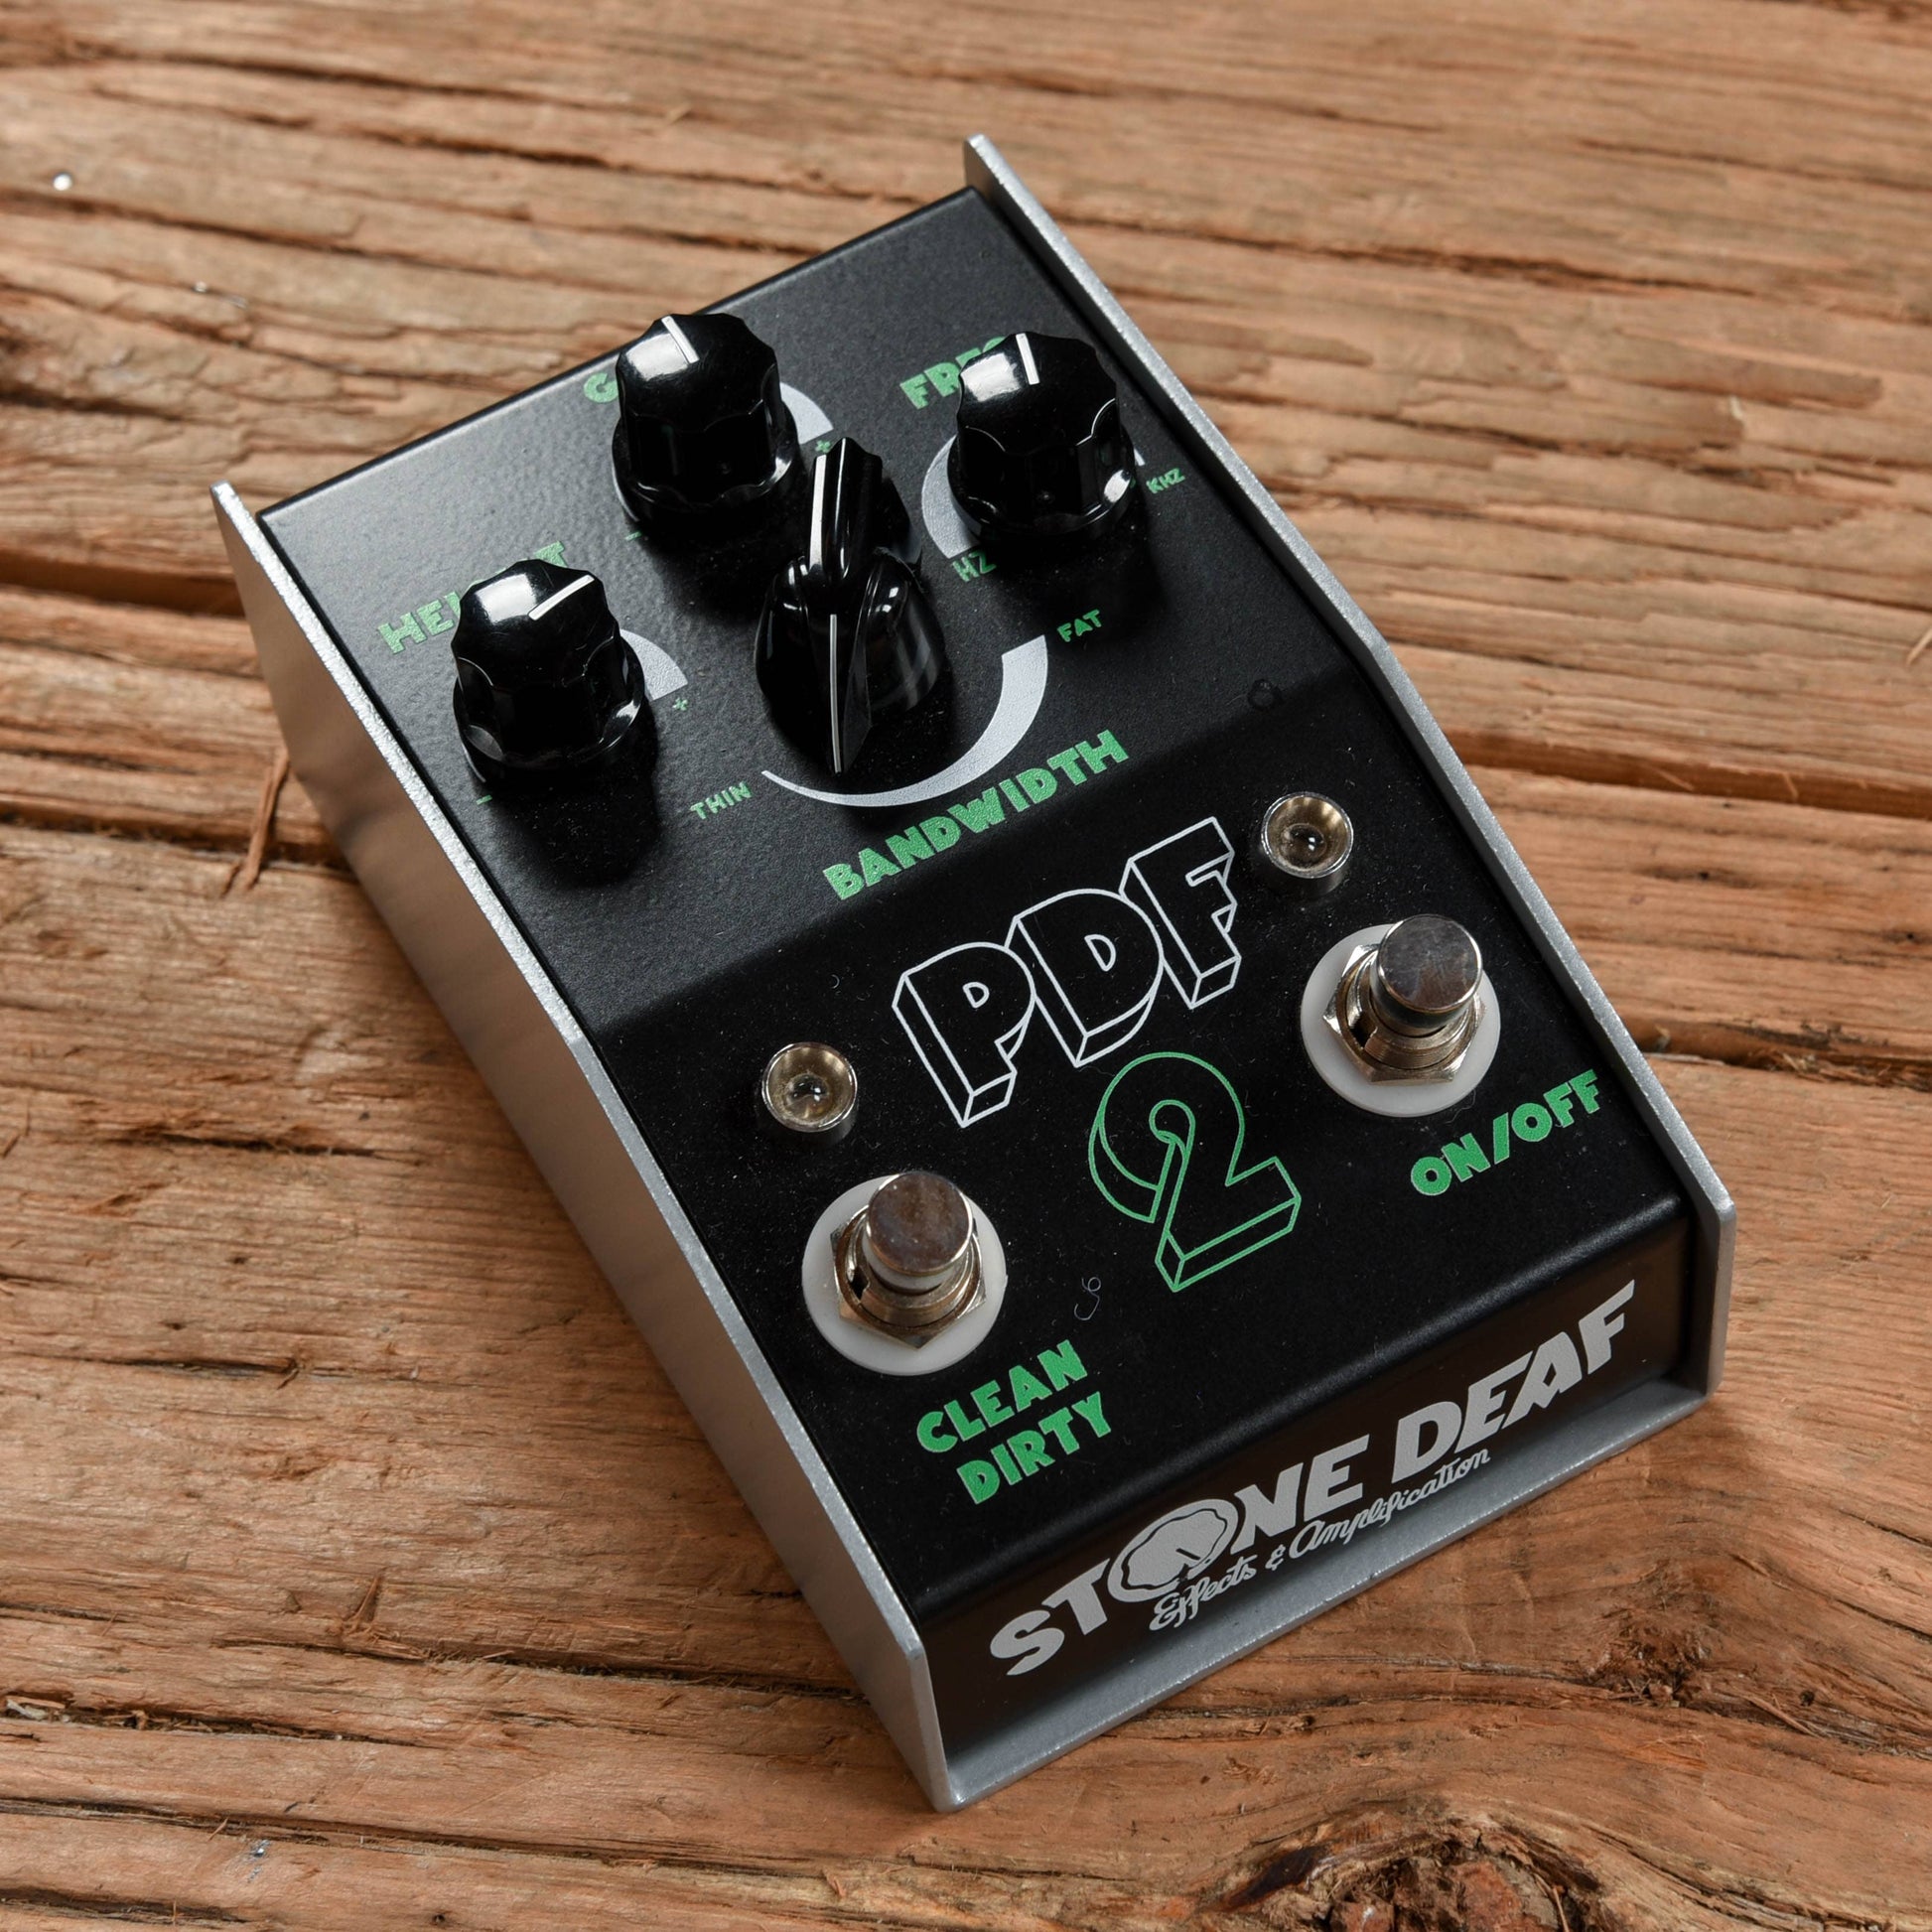 Stone Deaf PDF-2 Parametric Distortion Effects and Pedals / Distortion